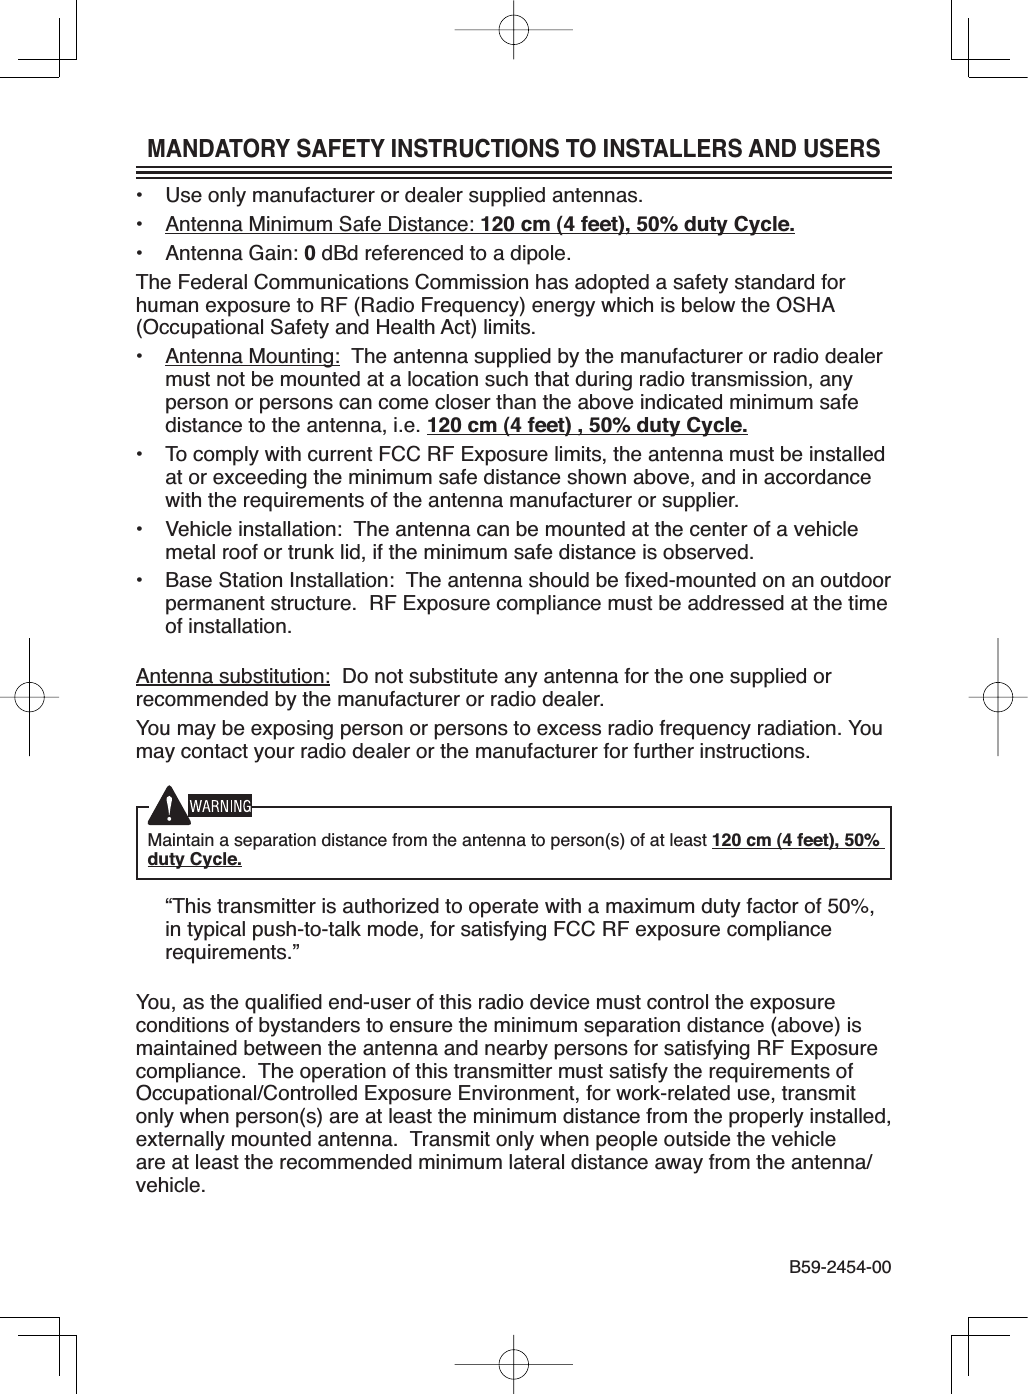 MANDATORY SAFETY INSTRUCTIONS TO INSTALLERS AND USERS• Use only manufacturer or dealer supplied antennas.• Antenna Minimum Safe Distance: 120 cm (4 feet), 50% duty Cycle.• Antenna Gain: 0dBd referenced to a dipole.The Federal Communications Commission has adopted a safety standard forhuman exposure to RF (Radio Frequency) energy which is below the OSHA(Occupational Safety and Health Act) limits.• Antenna Mounting: The antenna supplied by the manufacturer or radio dealermust not be mounted at a location such that during radio transmission, anyperson or persons can come closer than the above indicated minimum safedistance to the antenna, i.e. 120 cm (4 feet) , 50% duty Cycle.• To comply with current FCC RF Exposure limits, the antenna must be installedat or exceeding the minimum safe distance shown above, and in accordancewith the requirements of the antenna manufacturer or supplier.• Vehicle installation: The antenna can be mounted at the center of a vehiclemetal roof or trunk lid, if the minimum safe distance is observed.• Base Station Installation: The antenna should be À[HGPRXQWHG on an outdoorpermanent structure. RF Exposure compliance must be addressed at the timeof installation.Antenna substitution: Do not substitute any antenna for the one supplied orrecommended by the manufacturer or radio dealer.You may be exposing person or persons to excess radio frequency radiation. Youmay contact your radio dealer or the manufacturer for further instructions.Maintain a separation distance from the antenna to person(s) of at least 120 cm (4 feet), 50% duty Cycle. “This transmitter is authorized to operate with a maximum duty factor of 50%,LQW\SLFDOSXVKWRWDONPRGHIRUVDWLVI\LQJ)&amp;&amp;5)H[SRVXUHFRPSOLDQFHrequirements.”&lt;RXDVWKHTXDOLÀHGHQGXVHURIWKLVUDGLRGHYLFHPXVWFRQWUROWKHH[SRVXUHconditions of bystanders to ensure the minimum separation distance (above) ismaintained between the antenna and nearby persons for satisfying RF Exposurecompliance. The operation of this transmitter must satisfy the requirements of2FFXSDWLRQDO&amp;RQWUROOHG([SRVXUH(QYLURQPHQWIRUZRUNUHODWHGXVHWUDQVPLWonly when person(s) are at least the minimum distance from the properly installed,externally mounted antenna. Transmit only when people outside the vehicleare at least the recommended minimum lateral distance away from the antenna/vehicle.%